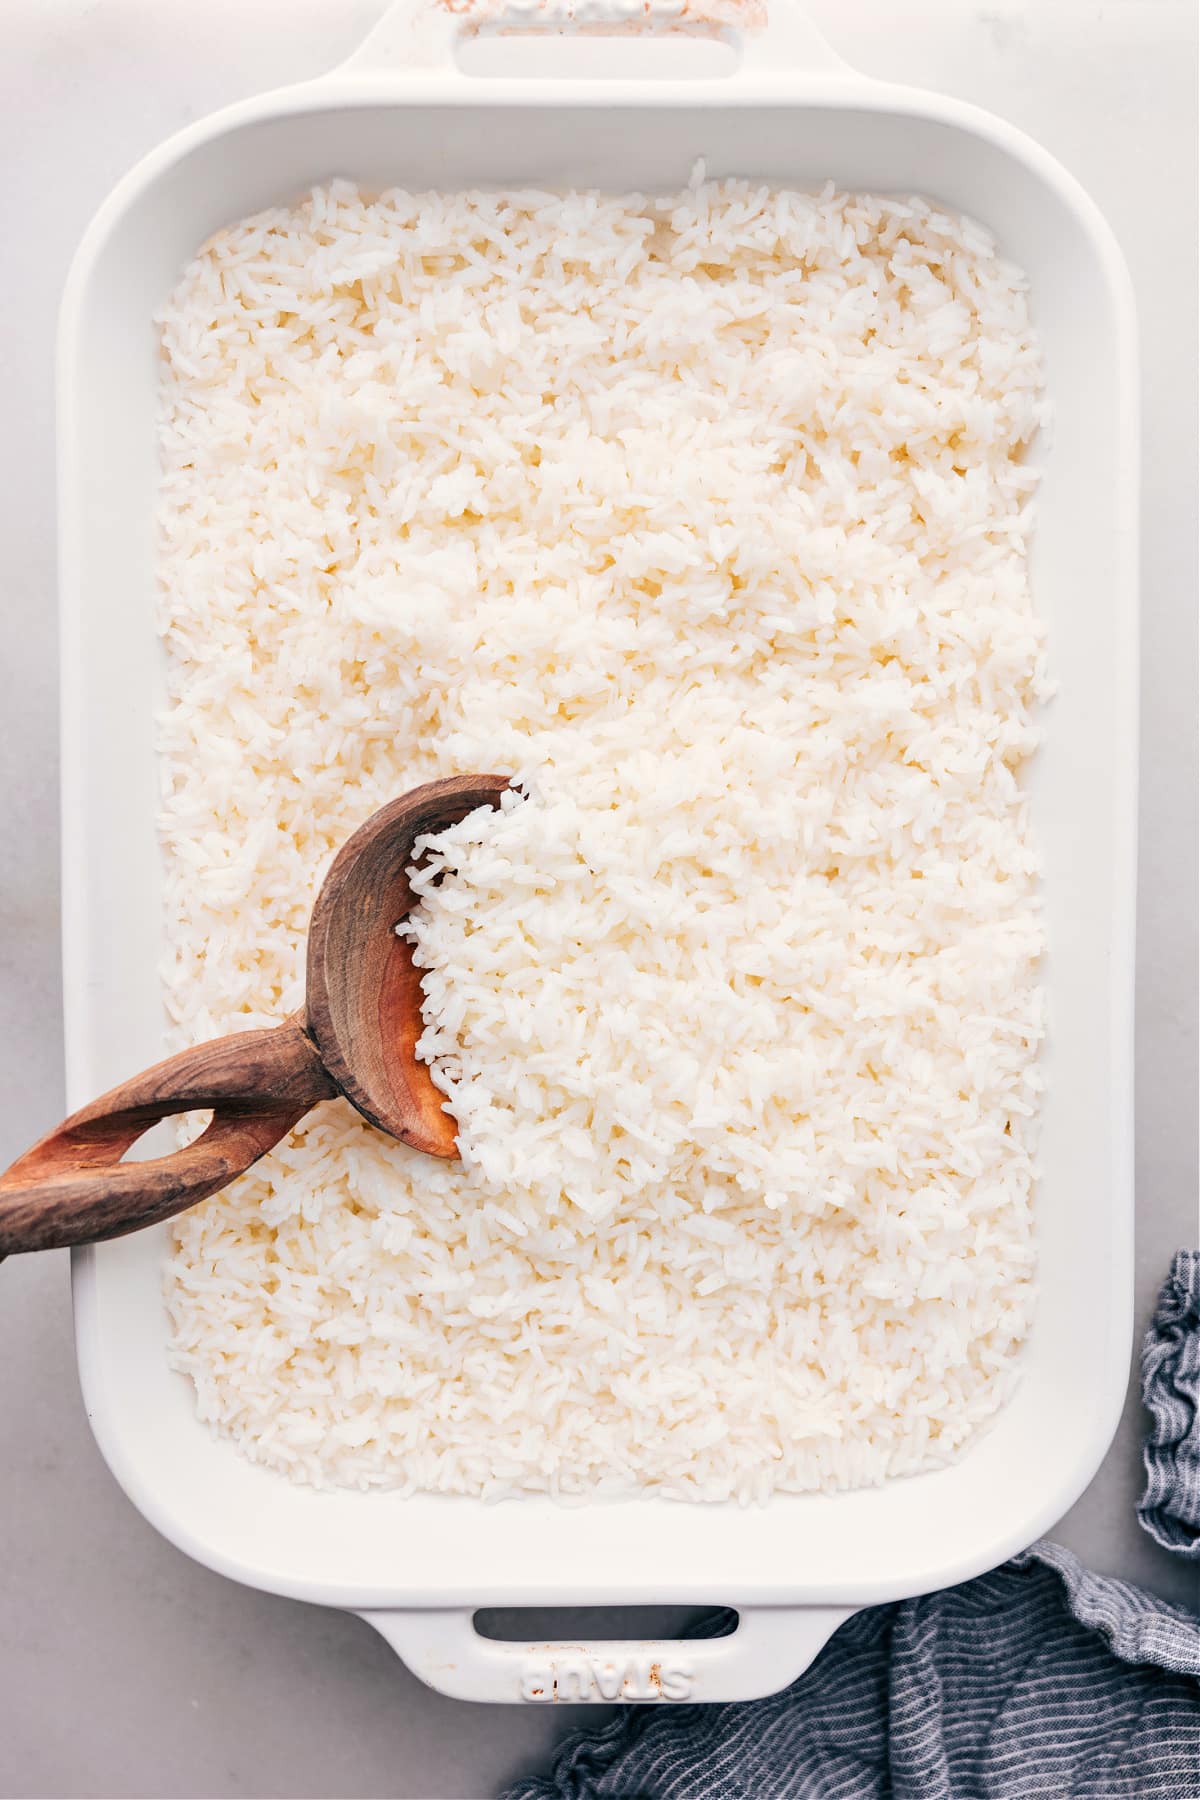 How To Make White Rice fresh out of the oven.